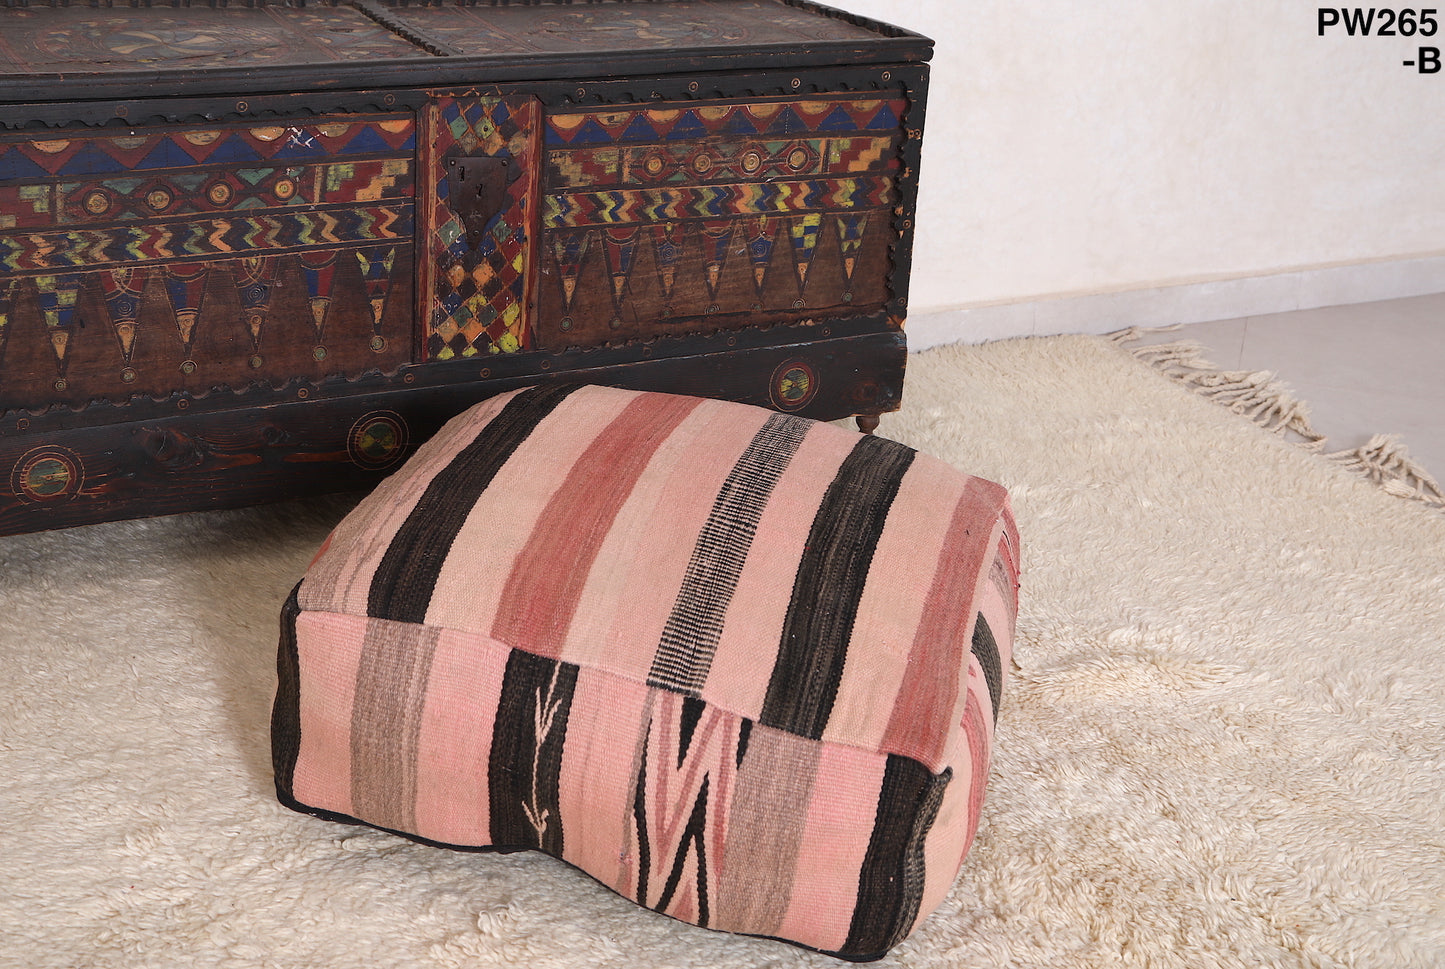 Moroccan Berber Floor woven Pouf for Seating